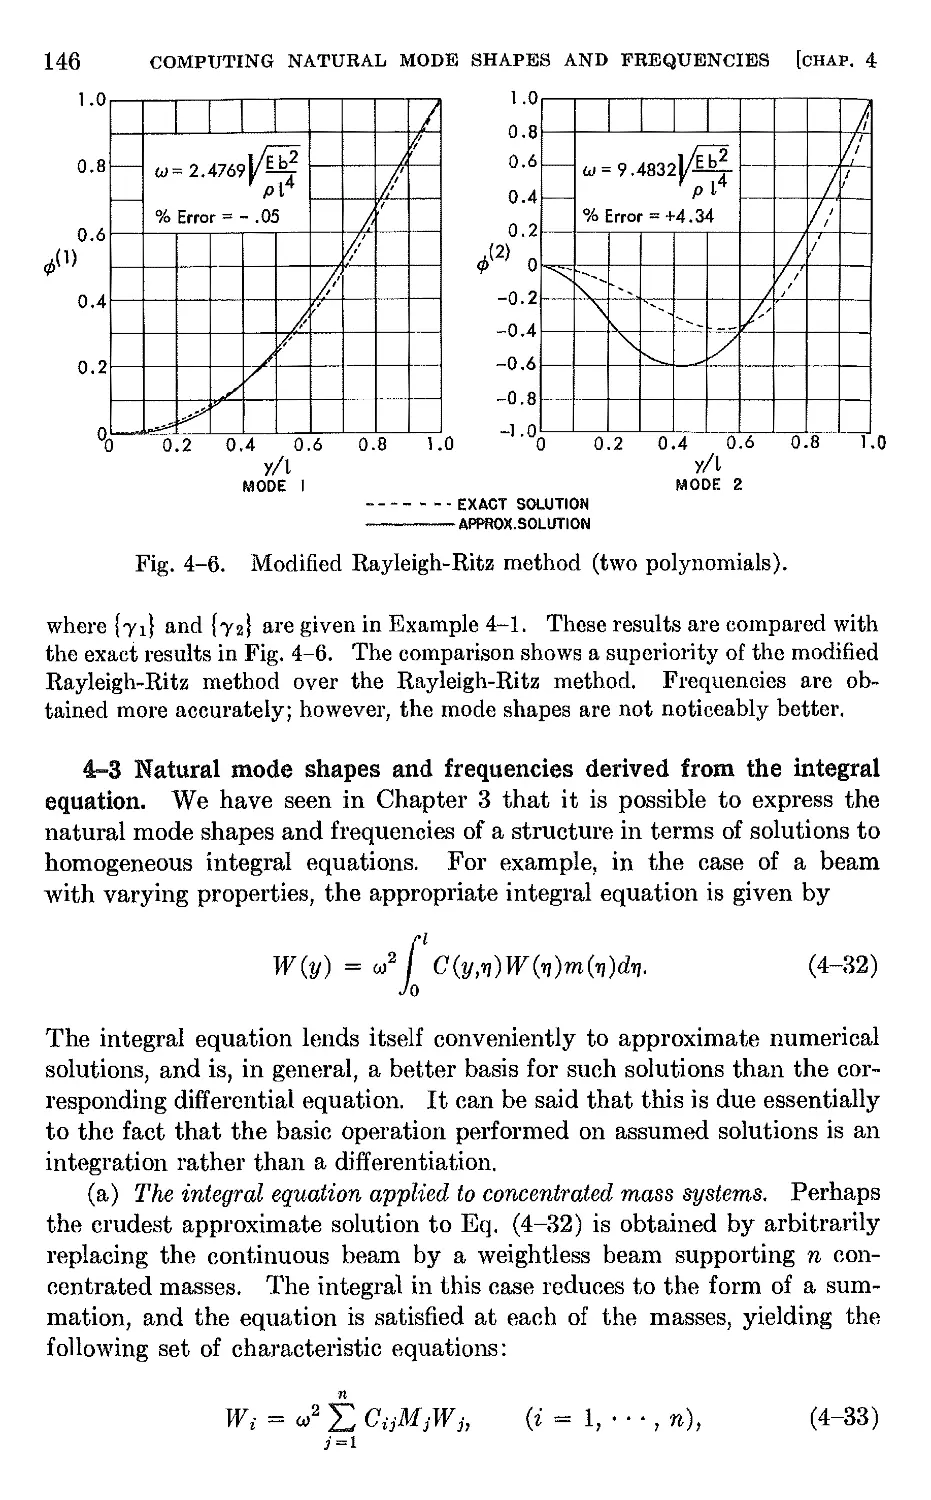 4.3 Natural mode shapes and frequencies derived from the integral equation